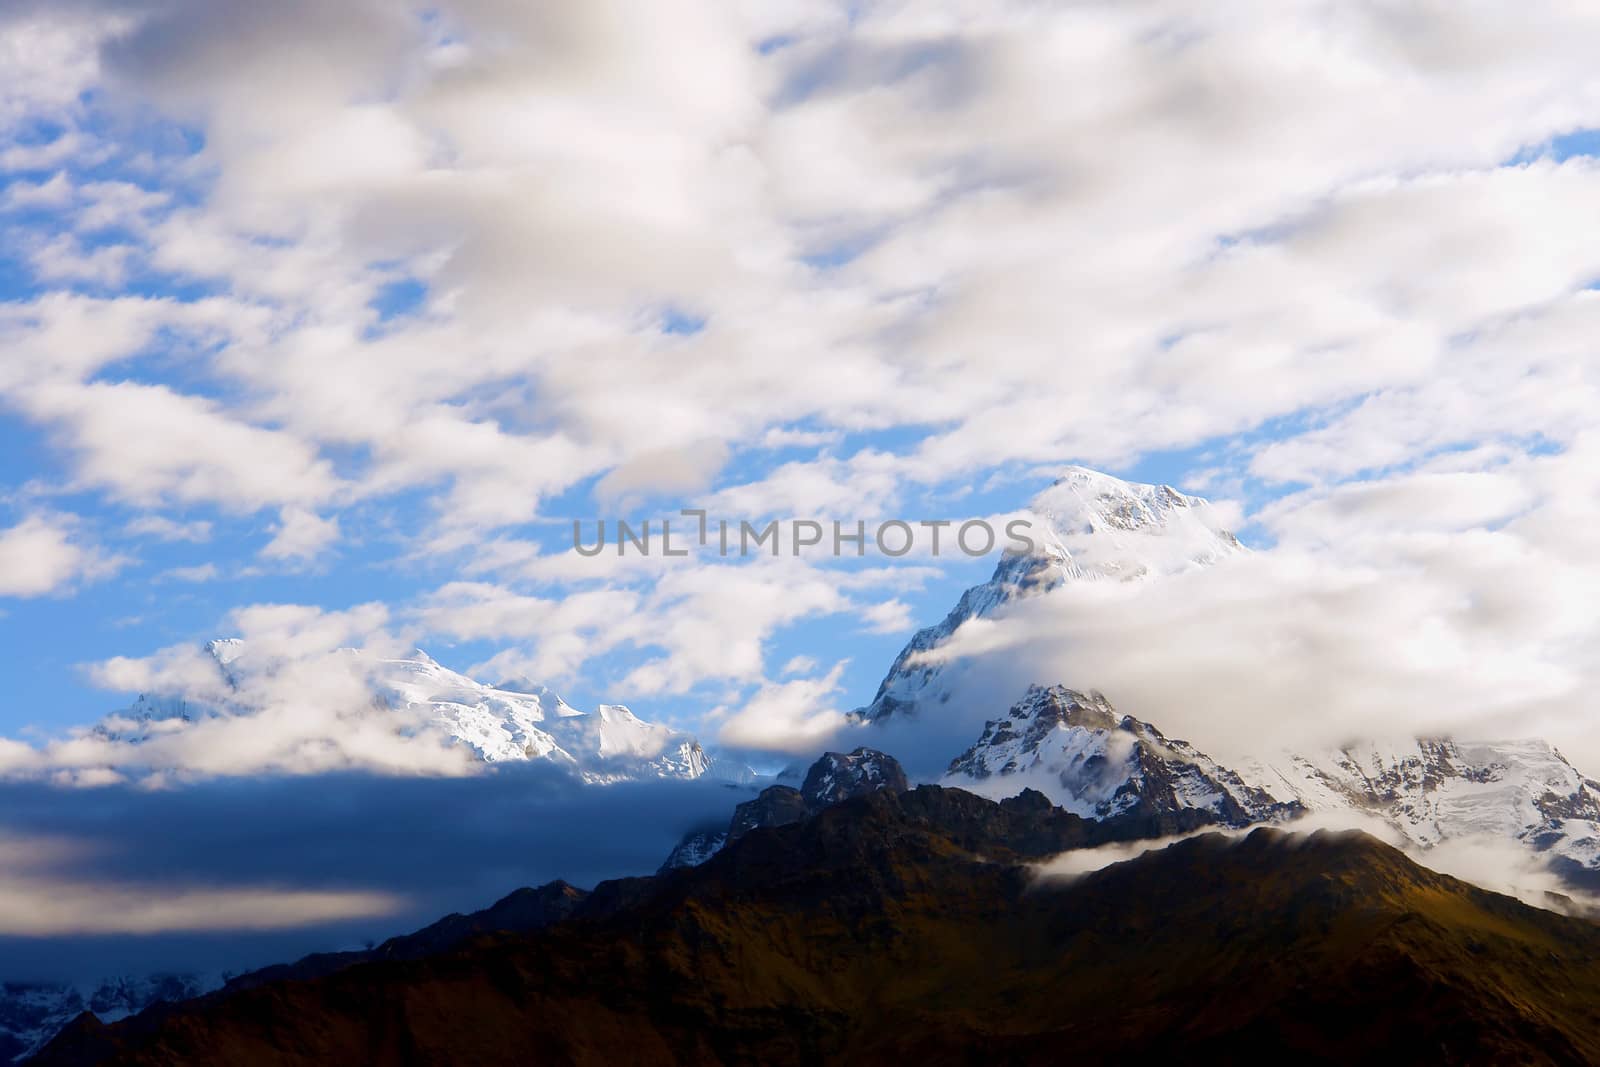 View of annapurna mountain, trek to base camp conservation area by ptxgarfield